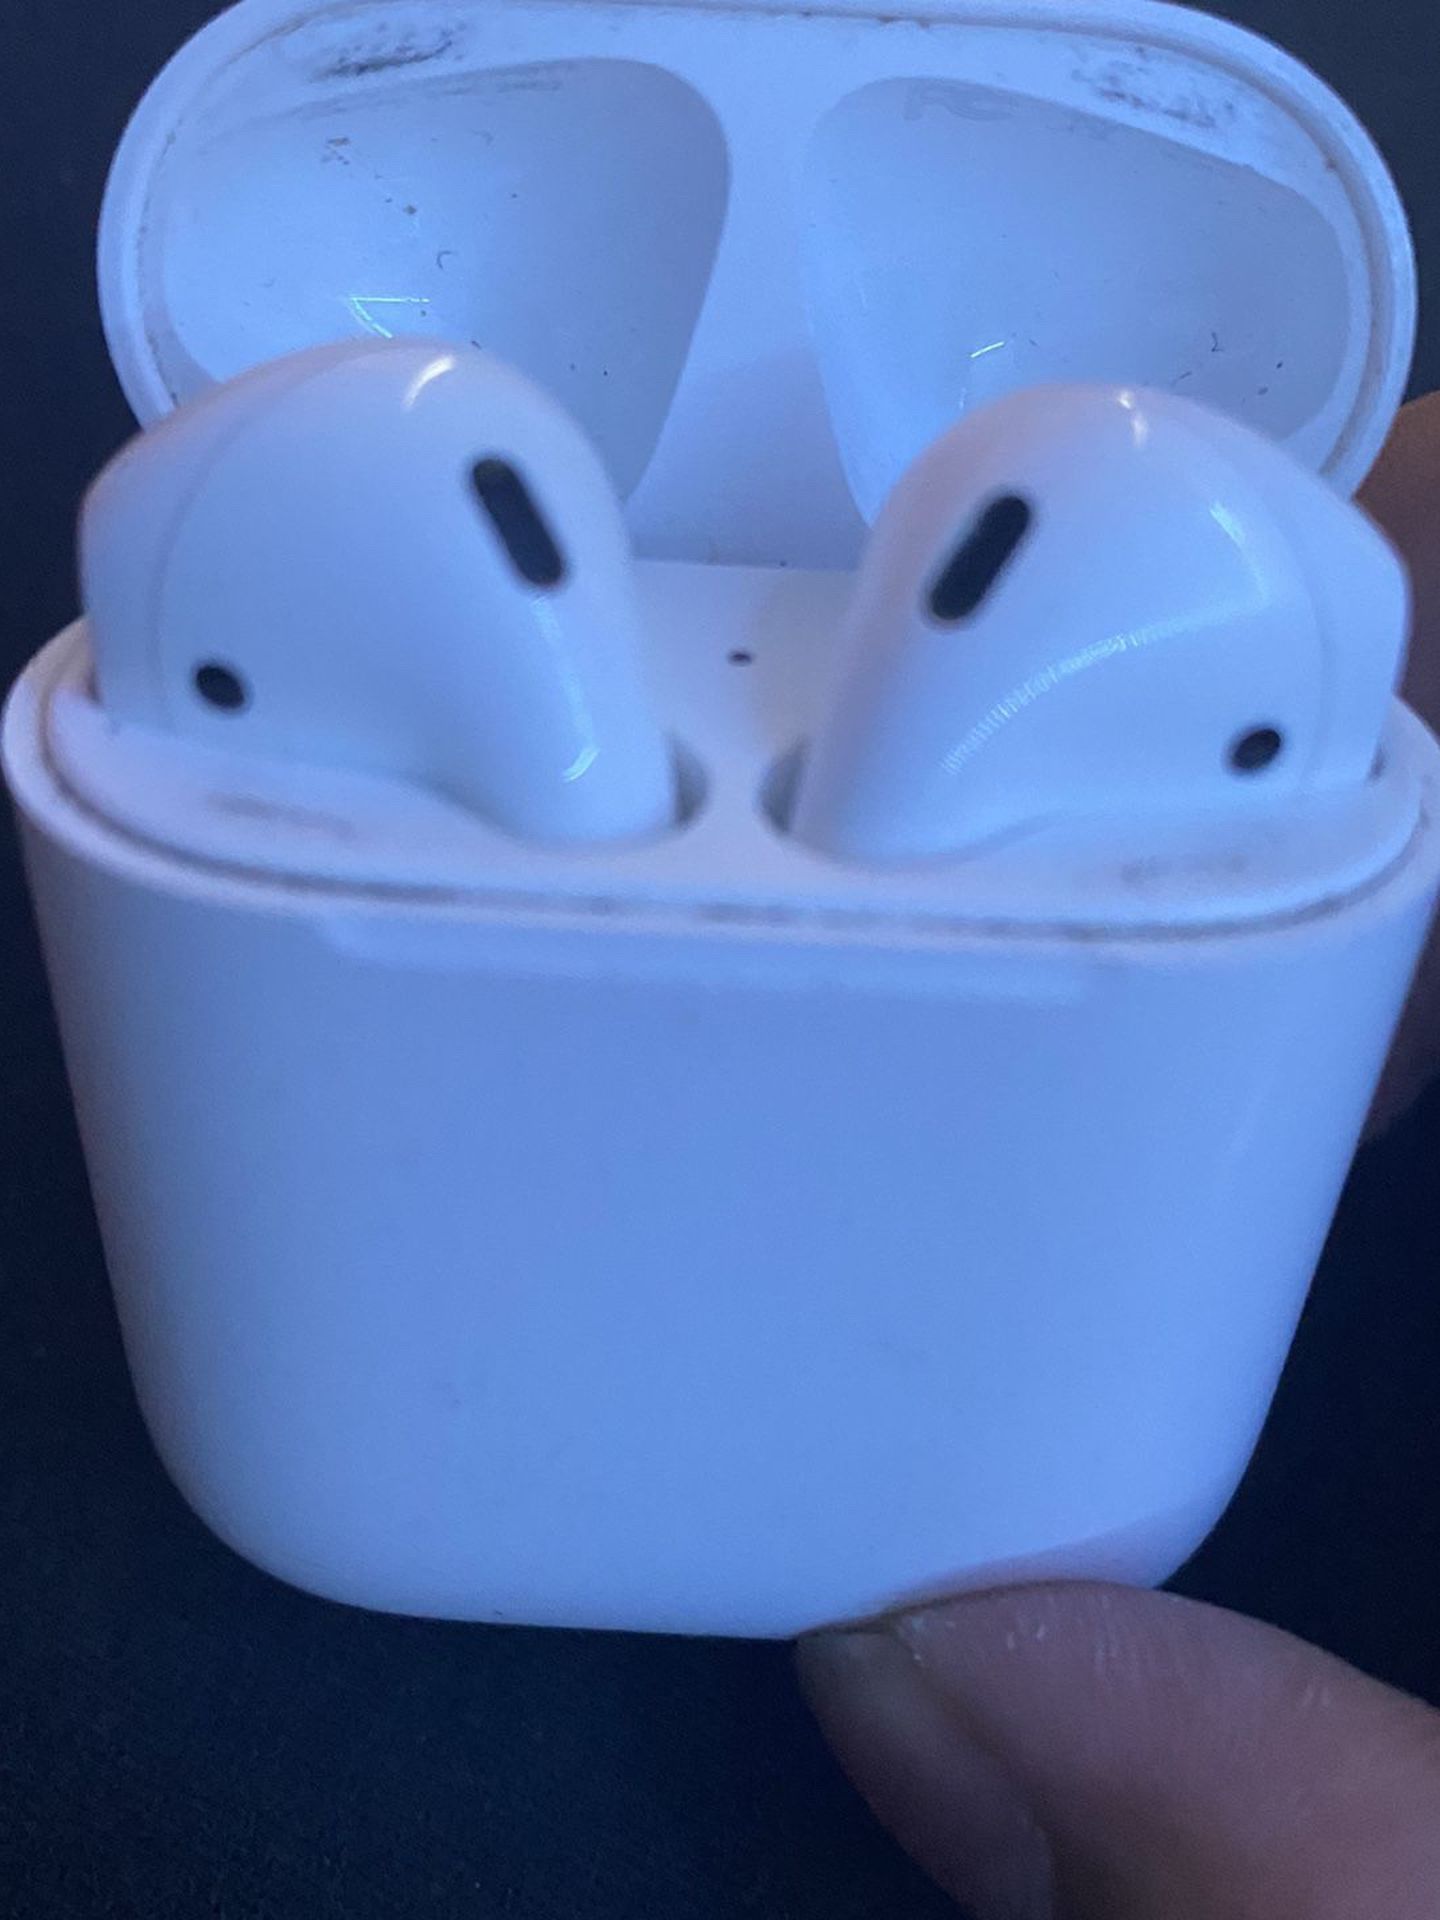 Generation 1 air pods